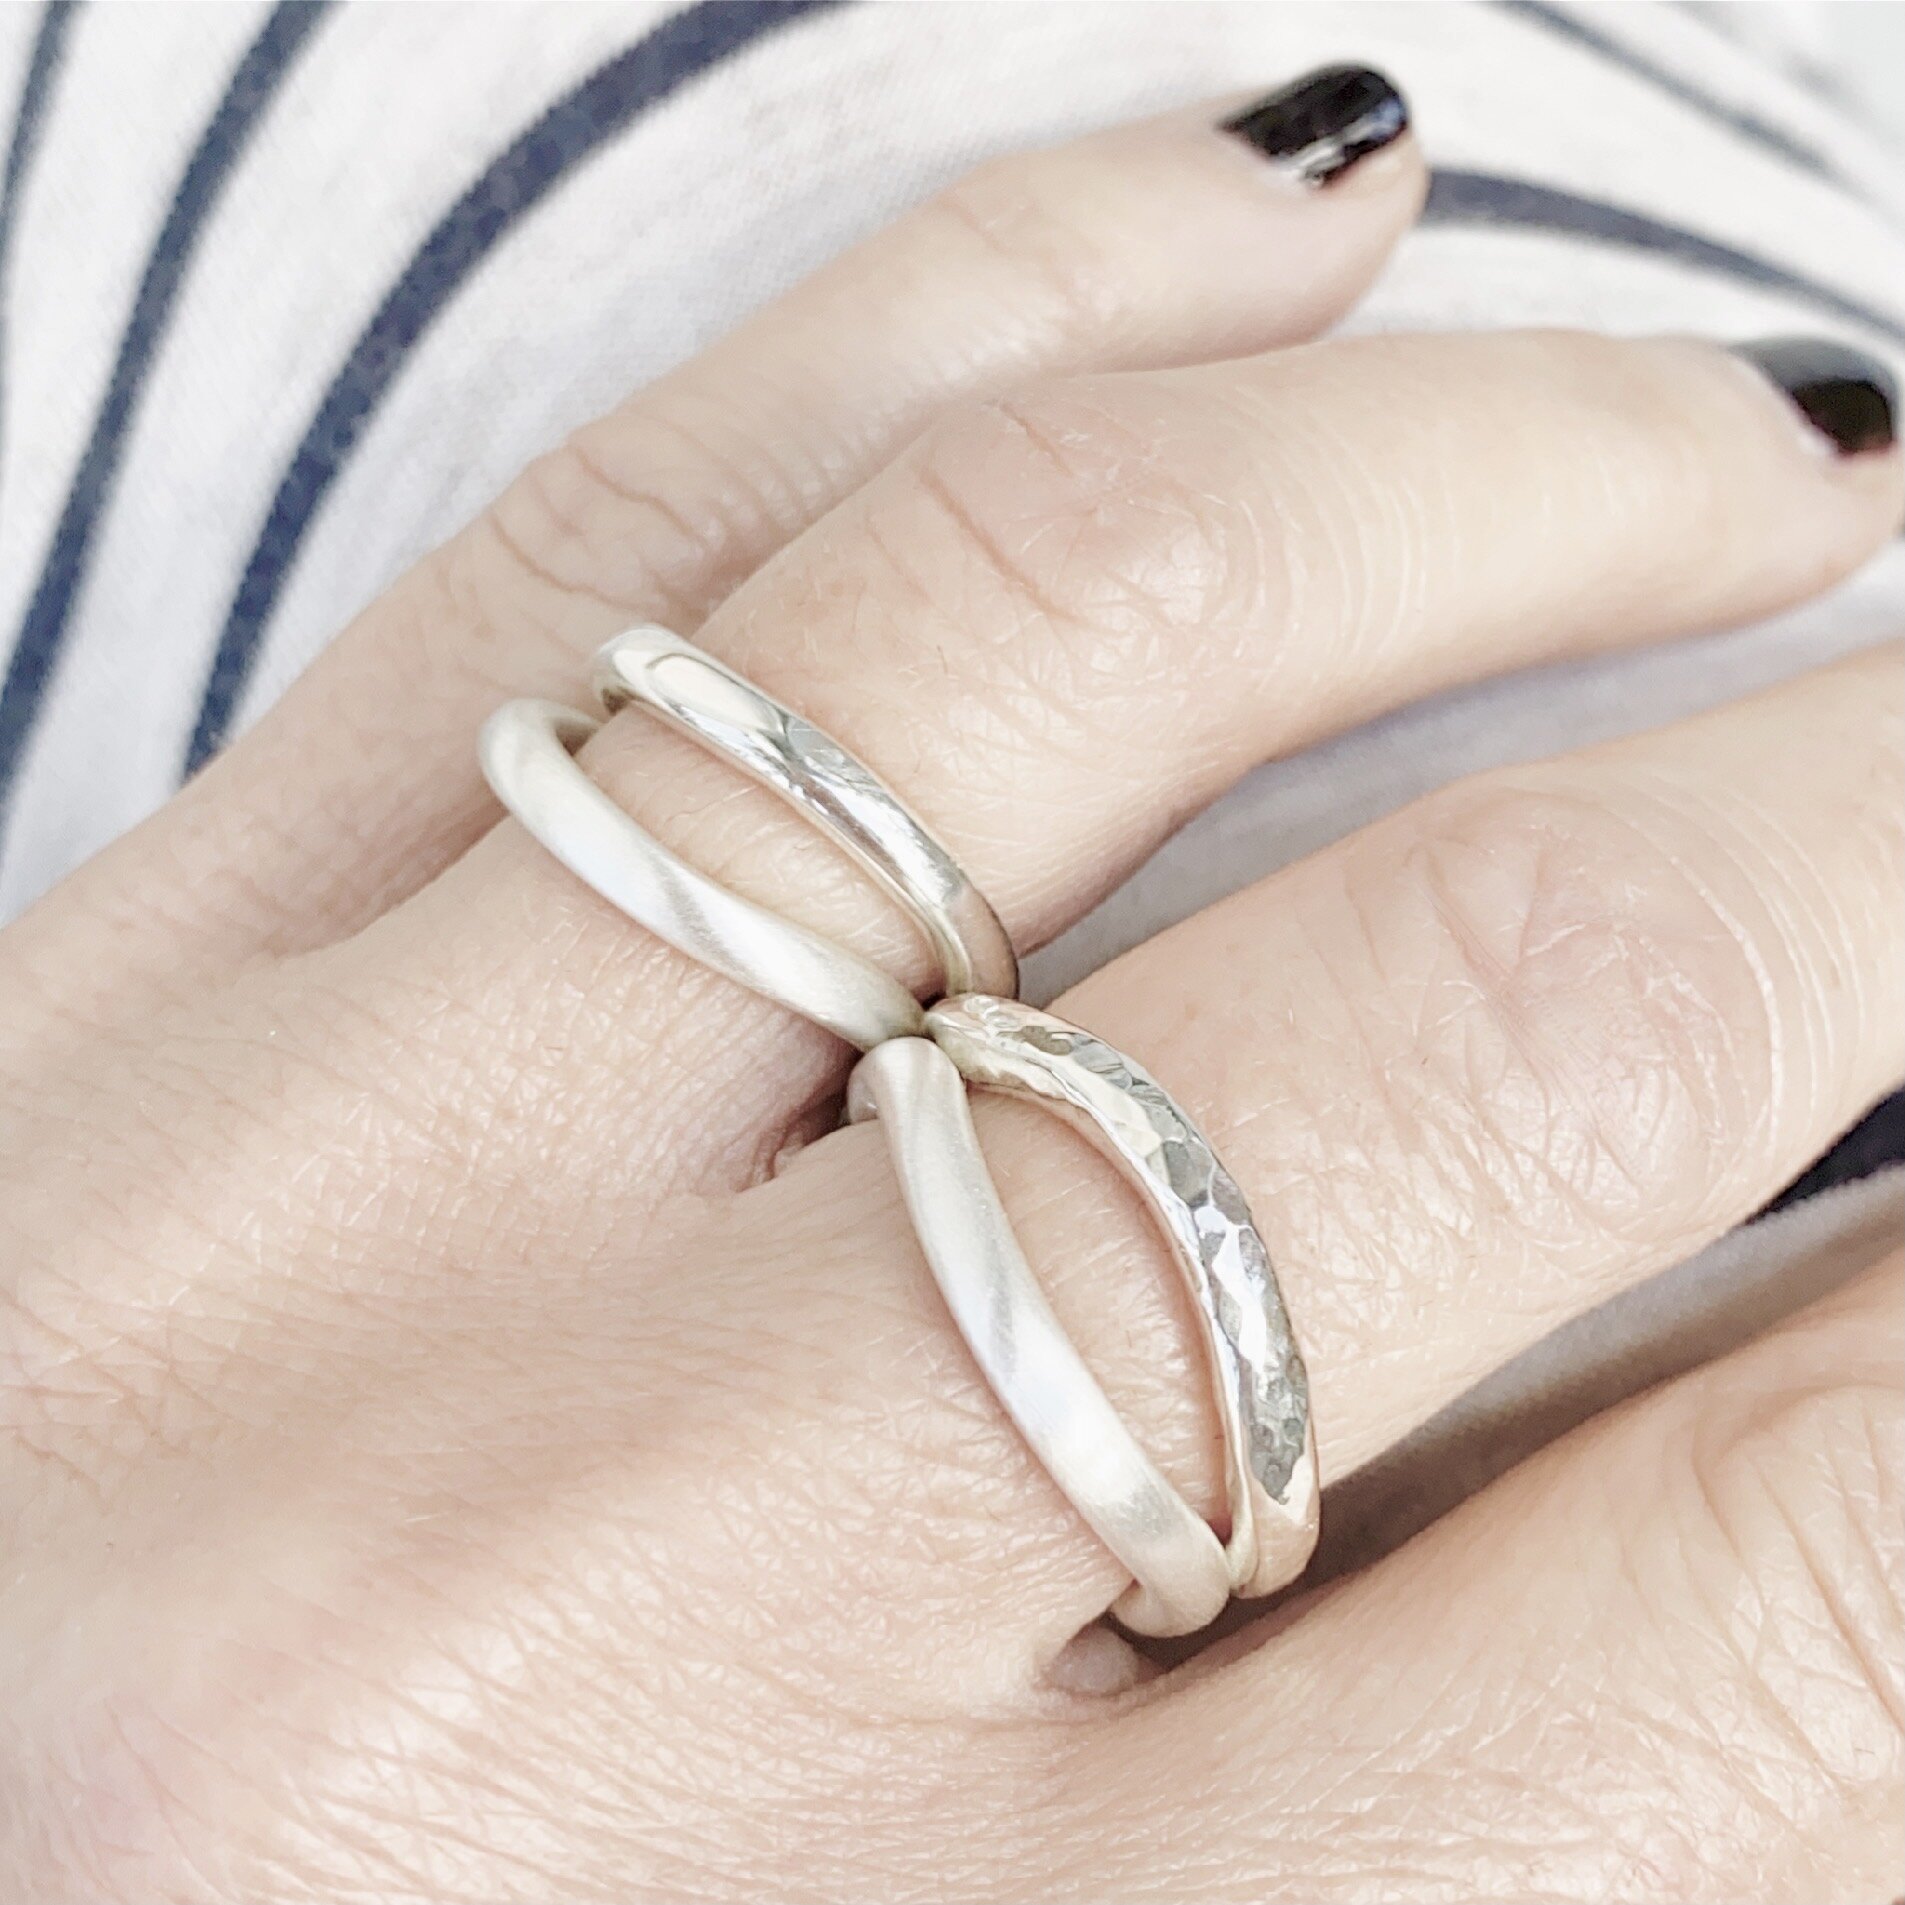 Sterling Silver Petite Organic Free Formed Curved Ring Stacks With Contrasting Finishes $210 each set